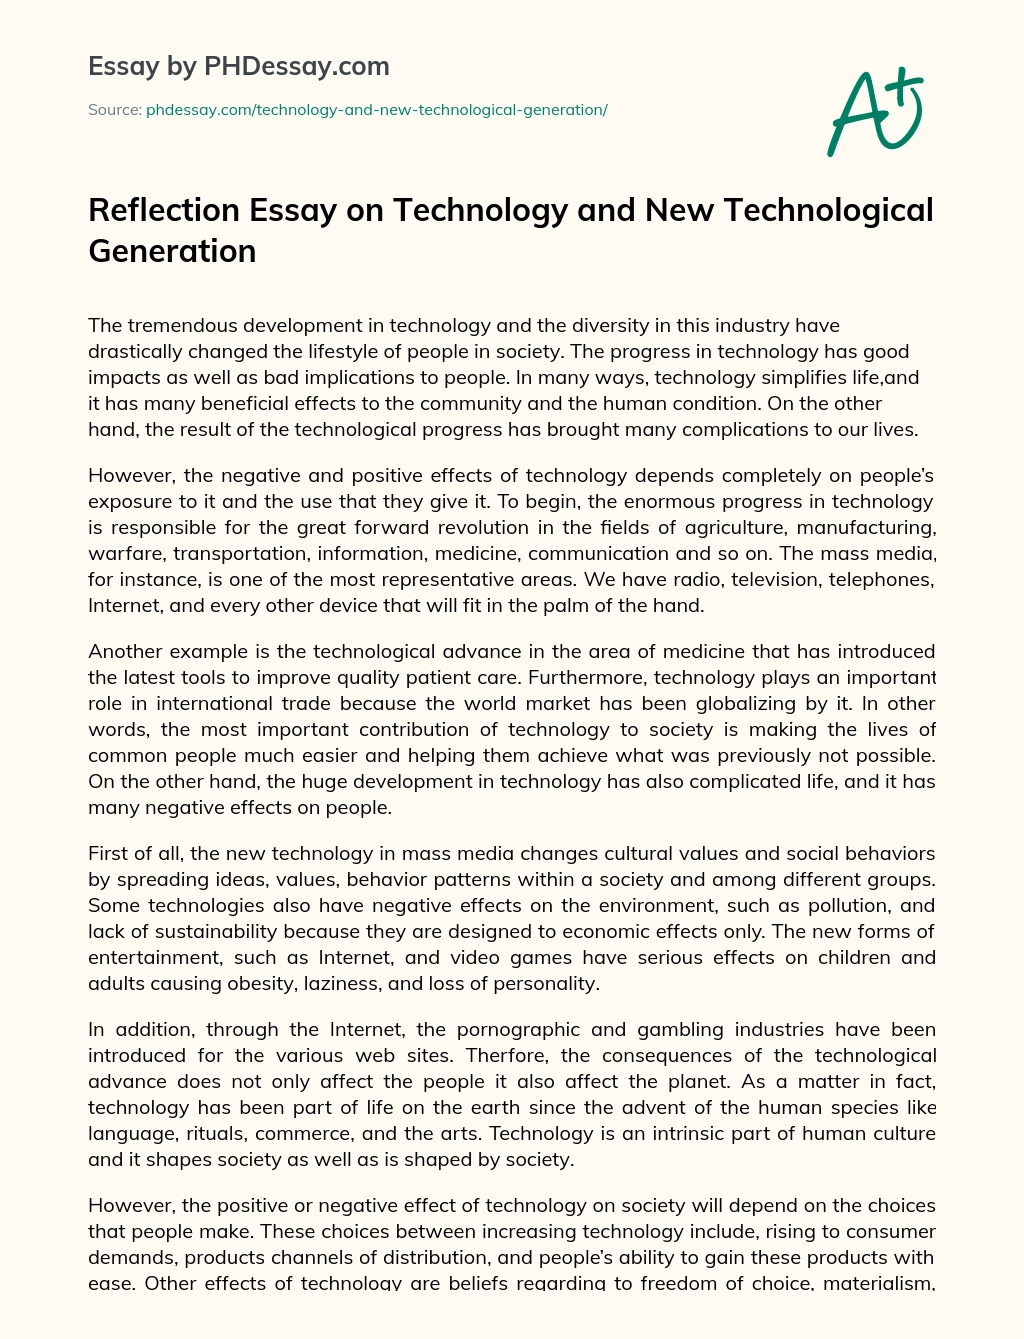 Reflection Essay on Technology and New Technological Generation essay